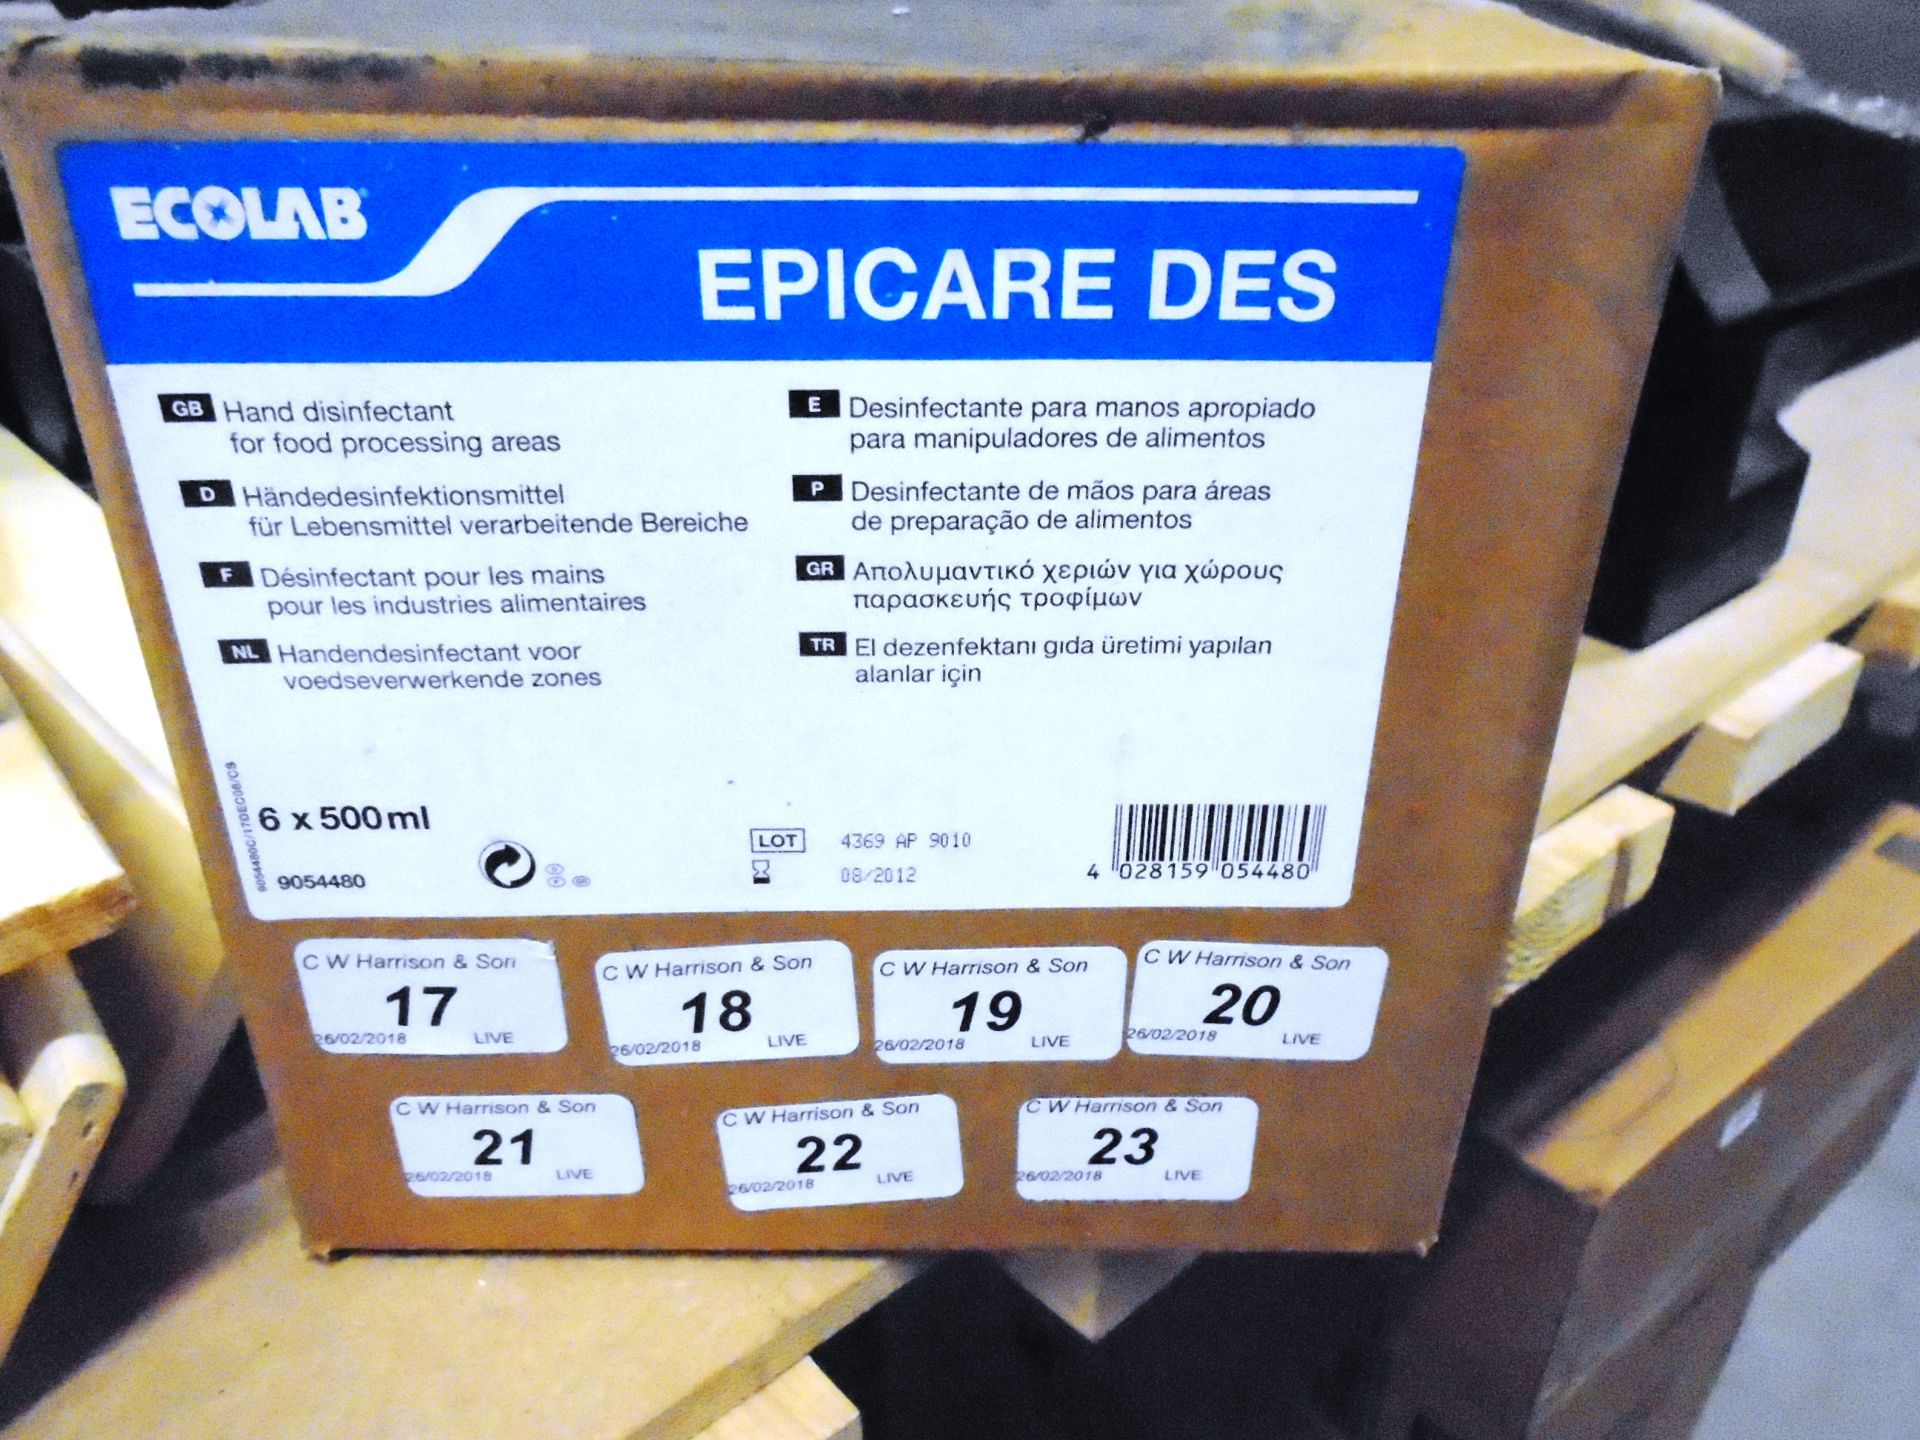 240 x Ecolab hand disinfectant for food processing areas (40 x outer boxes)